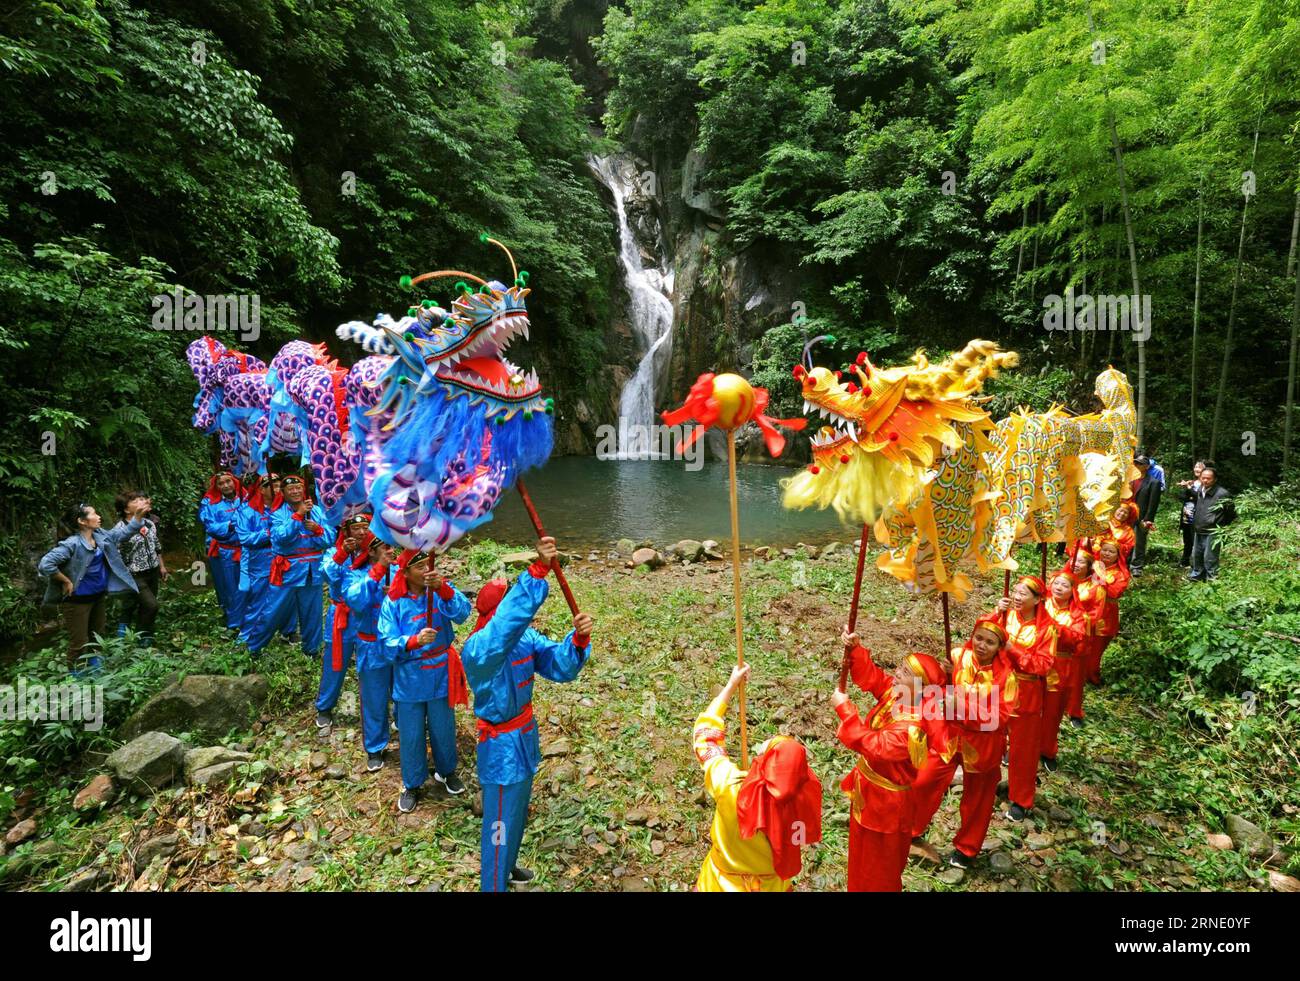 (160605) -- ANJI, June 5, 2016 -- Farmers rehearse dragon dance at a tourist spot in Anji County, east China s Zhejiang Province, June 4, 2016. Anji is known for its pleasant environment with flourishing bamboo plantations and many scenes from the famous movie Crouching Tiger, Hidden Dragon were shot here. The county persists in green, low-carbon development, and strives to protect environment as well as to develop local economy. June 5 is observed as World Environment Day every year, and this year s theme issued by China s Ministry of Environment Protection is improving the quality of the env Stock Photo